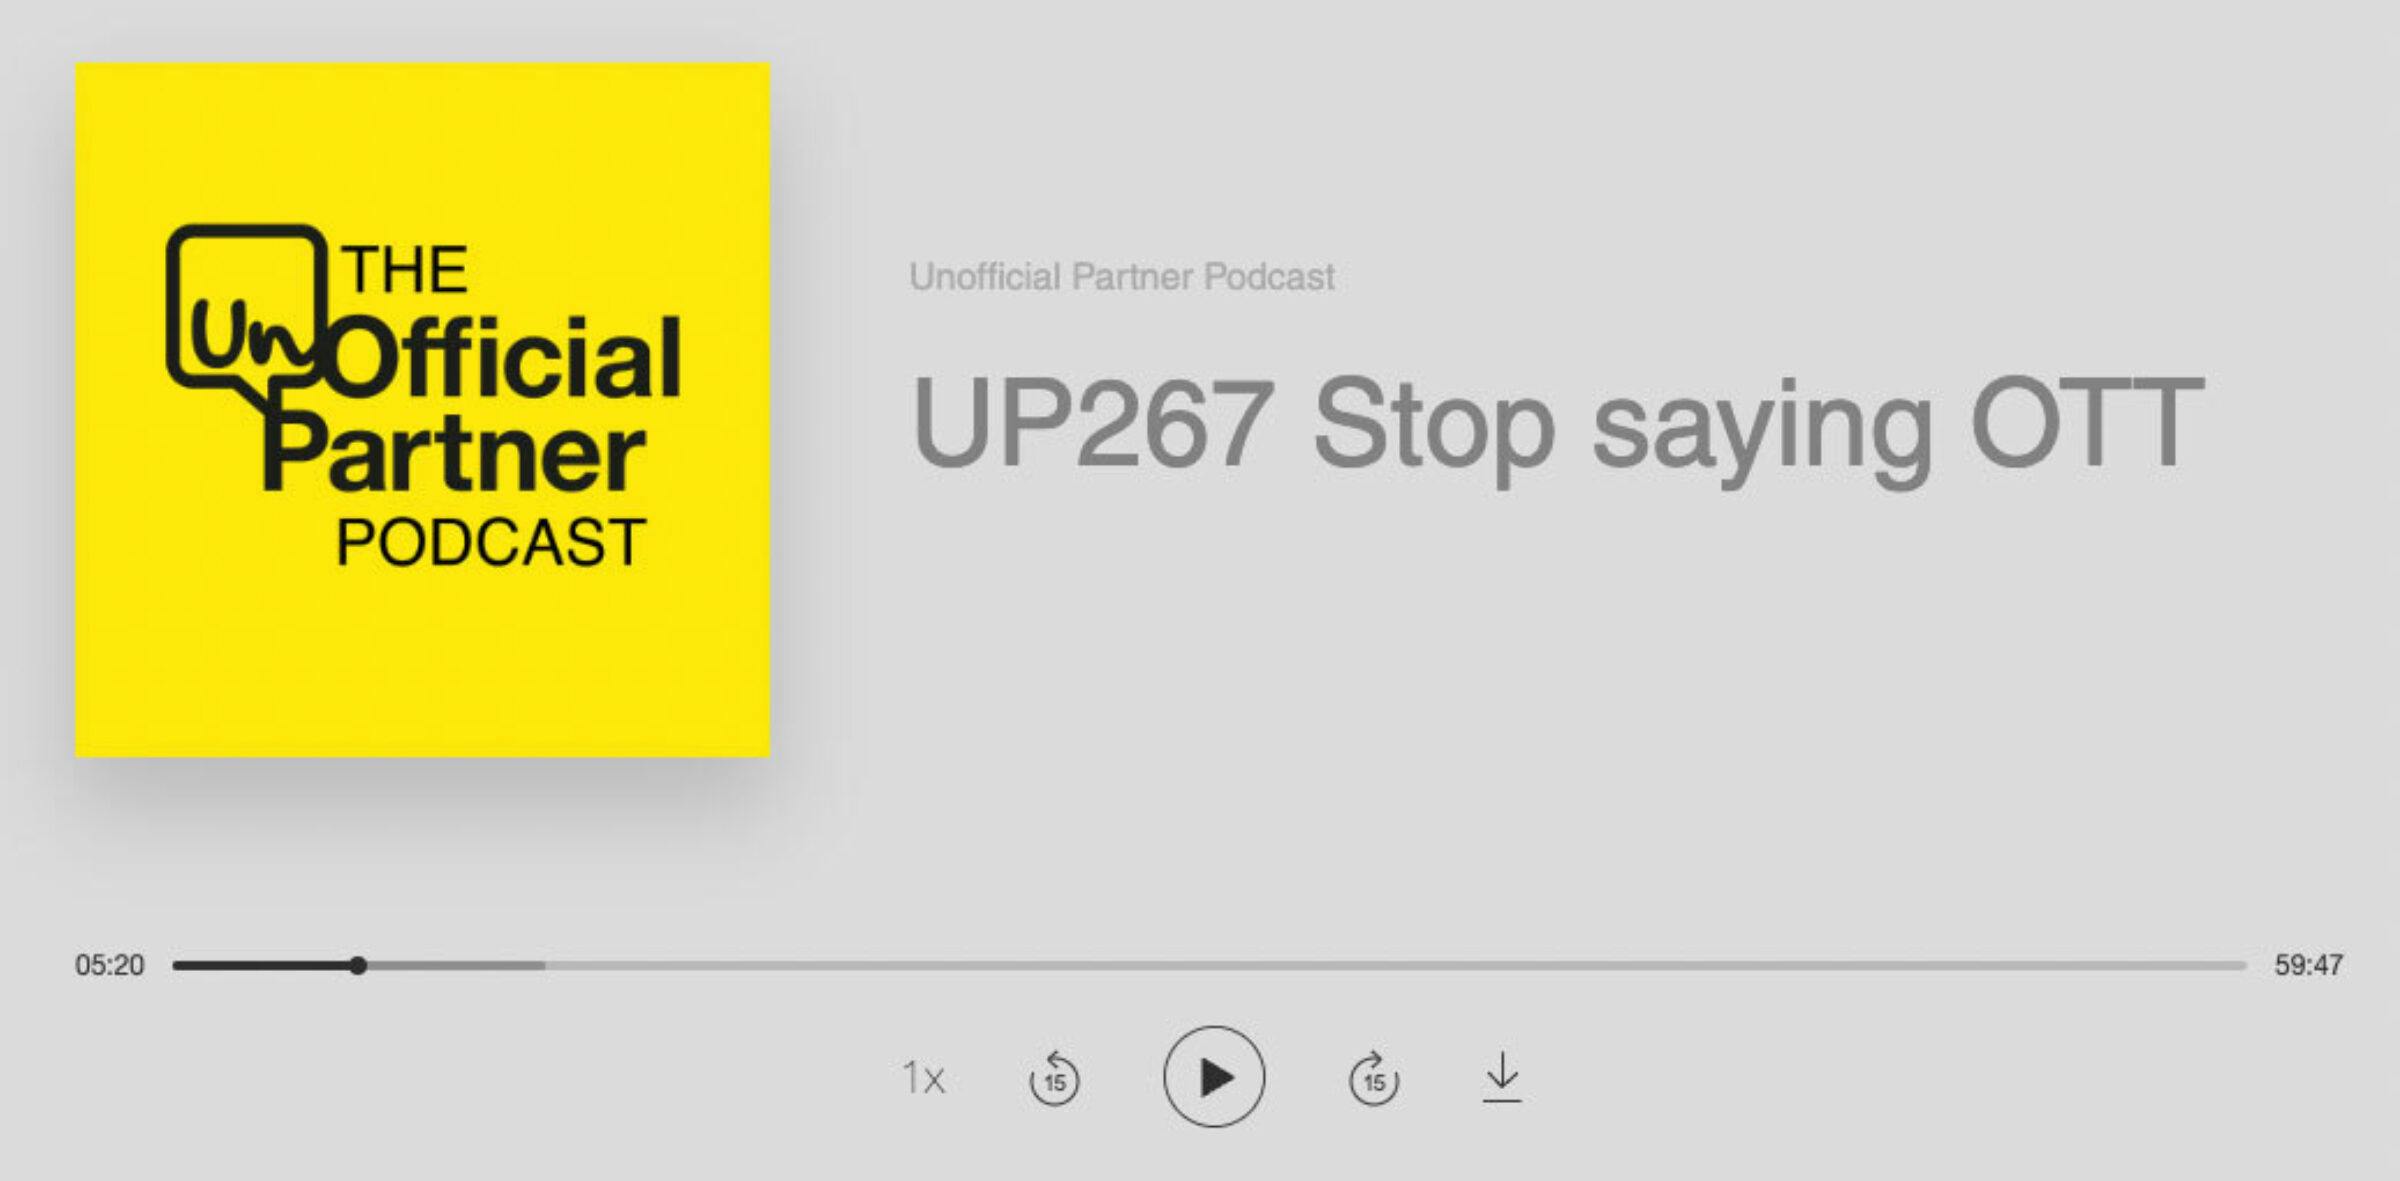 Unofficial partner podcast stop saying ott